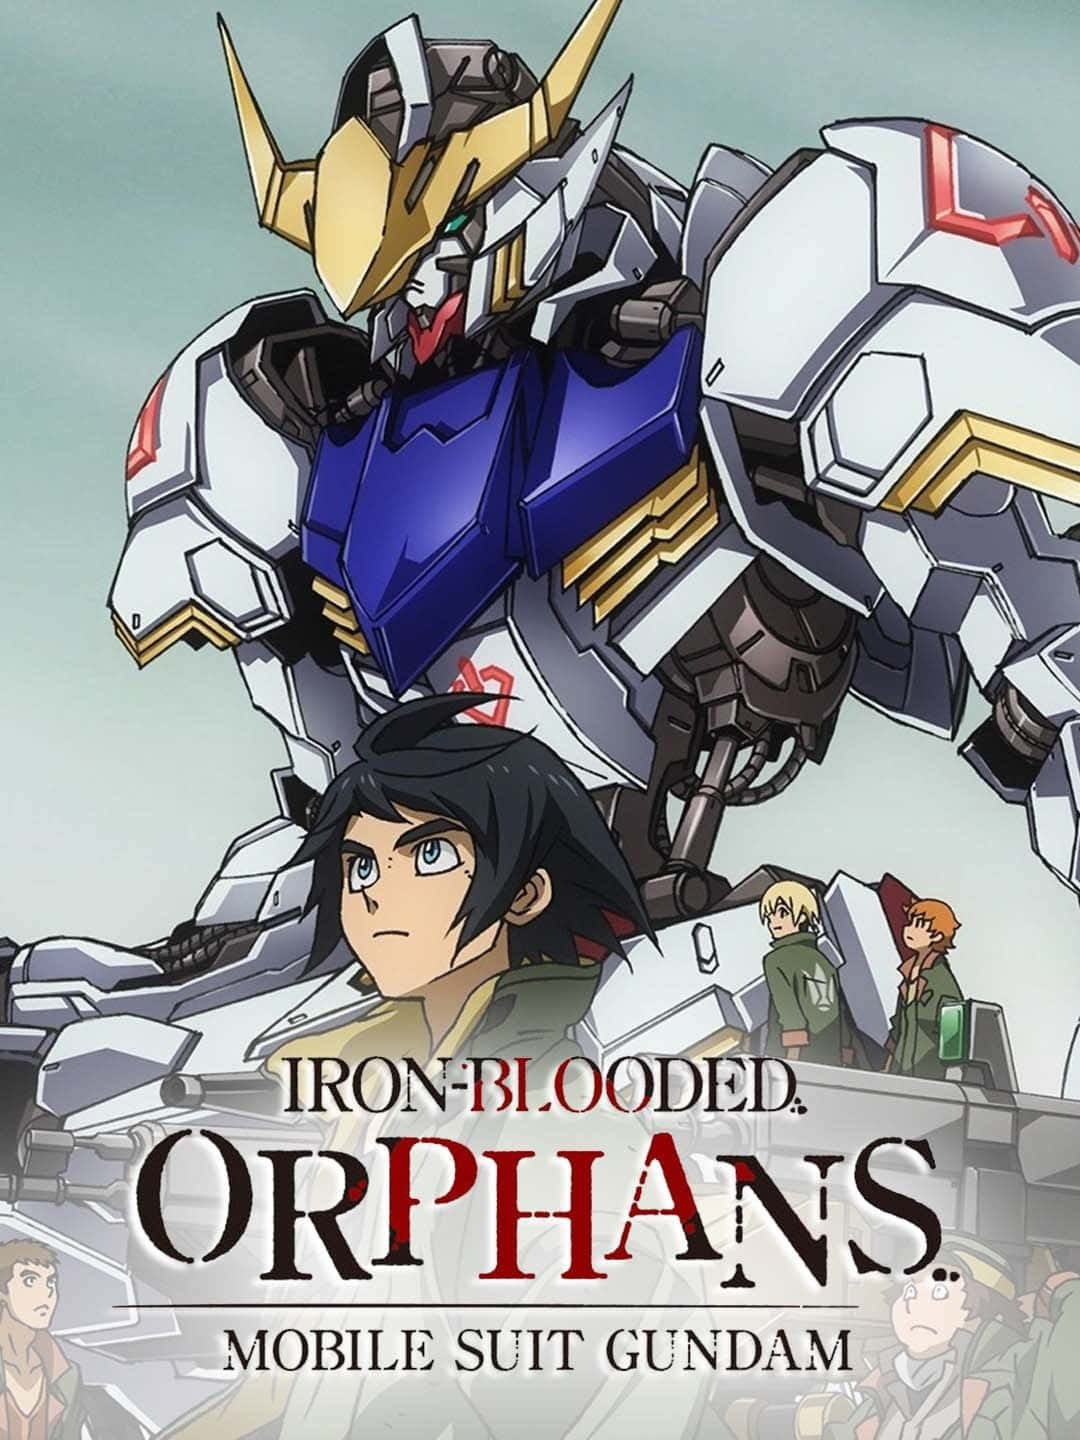 Follow Mikazuki and the Tekkadan Organization as they protect their turf in Mobile Suit Gundam Iron-blooded Orphans Wallpaper